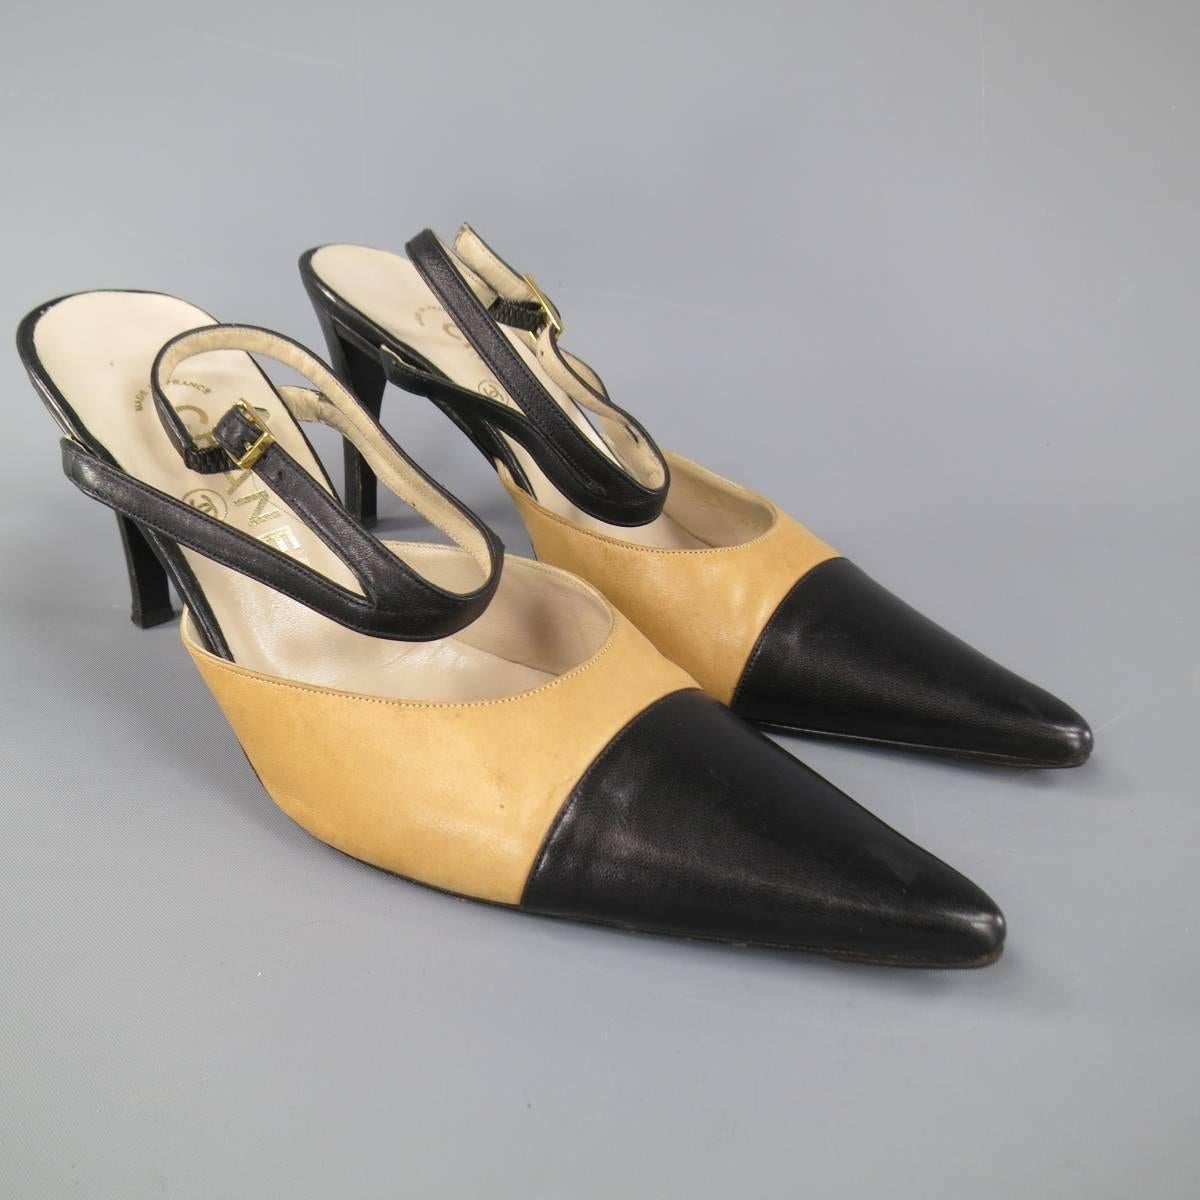 Iconic CHANEL pumps in black smooth leather featuring a pointed cap toe with tan beige body, covered skinny heel, and double ankle strap harness. Made in France.
 
Good Pre-Owned Condition.
Marked: IT 37.5
 
Heel: 3.5 in.
